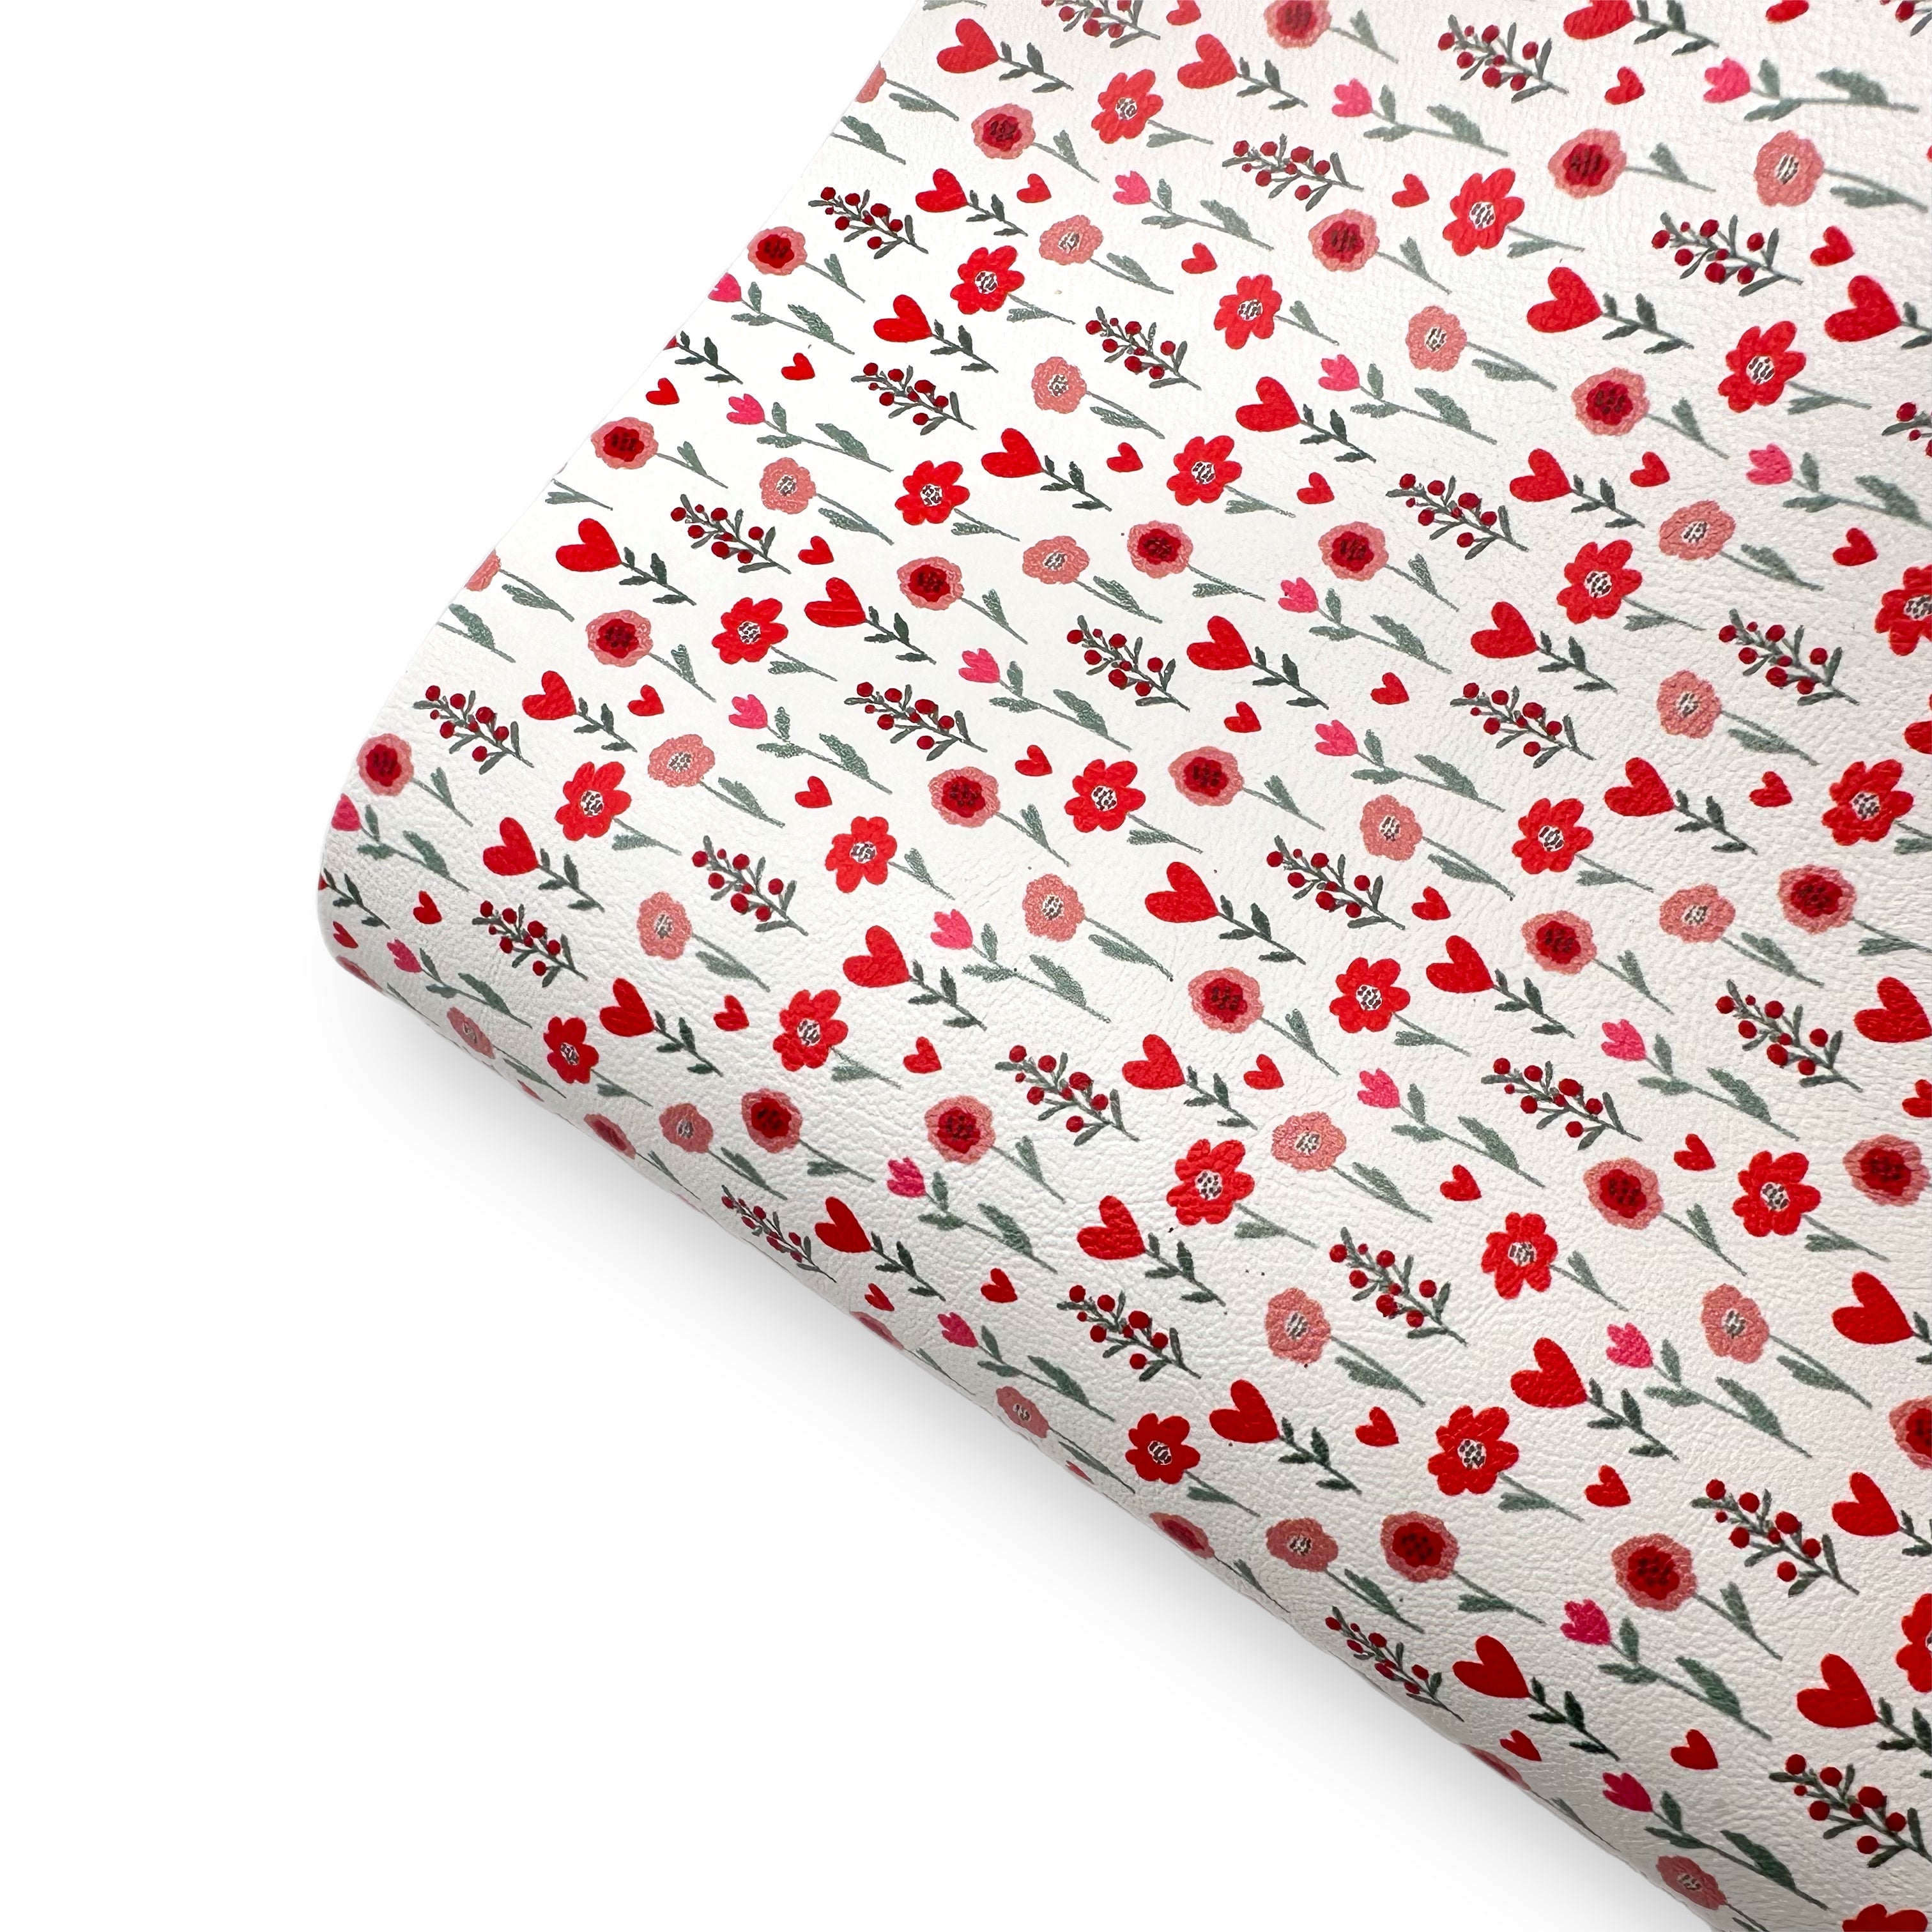 Pretty Valentines Floral Premium Faux Leather Fabric Sheets